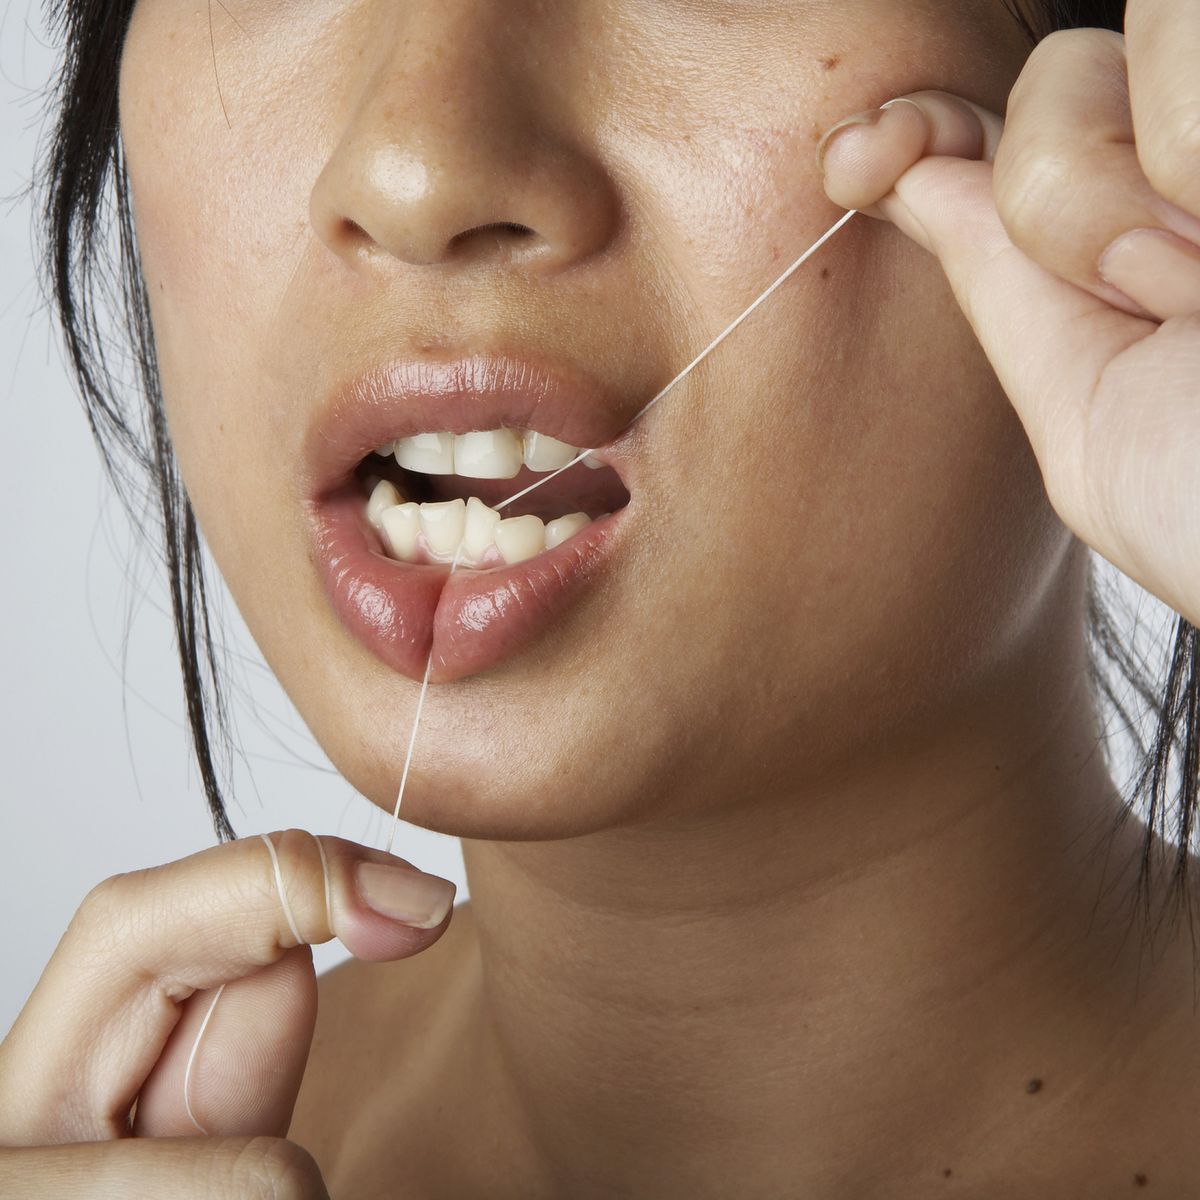 Who Made That Dental Floss? - The New York Times